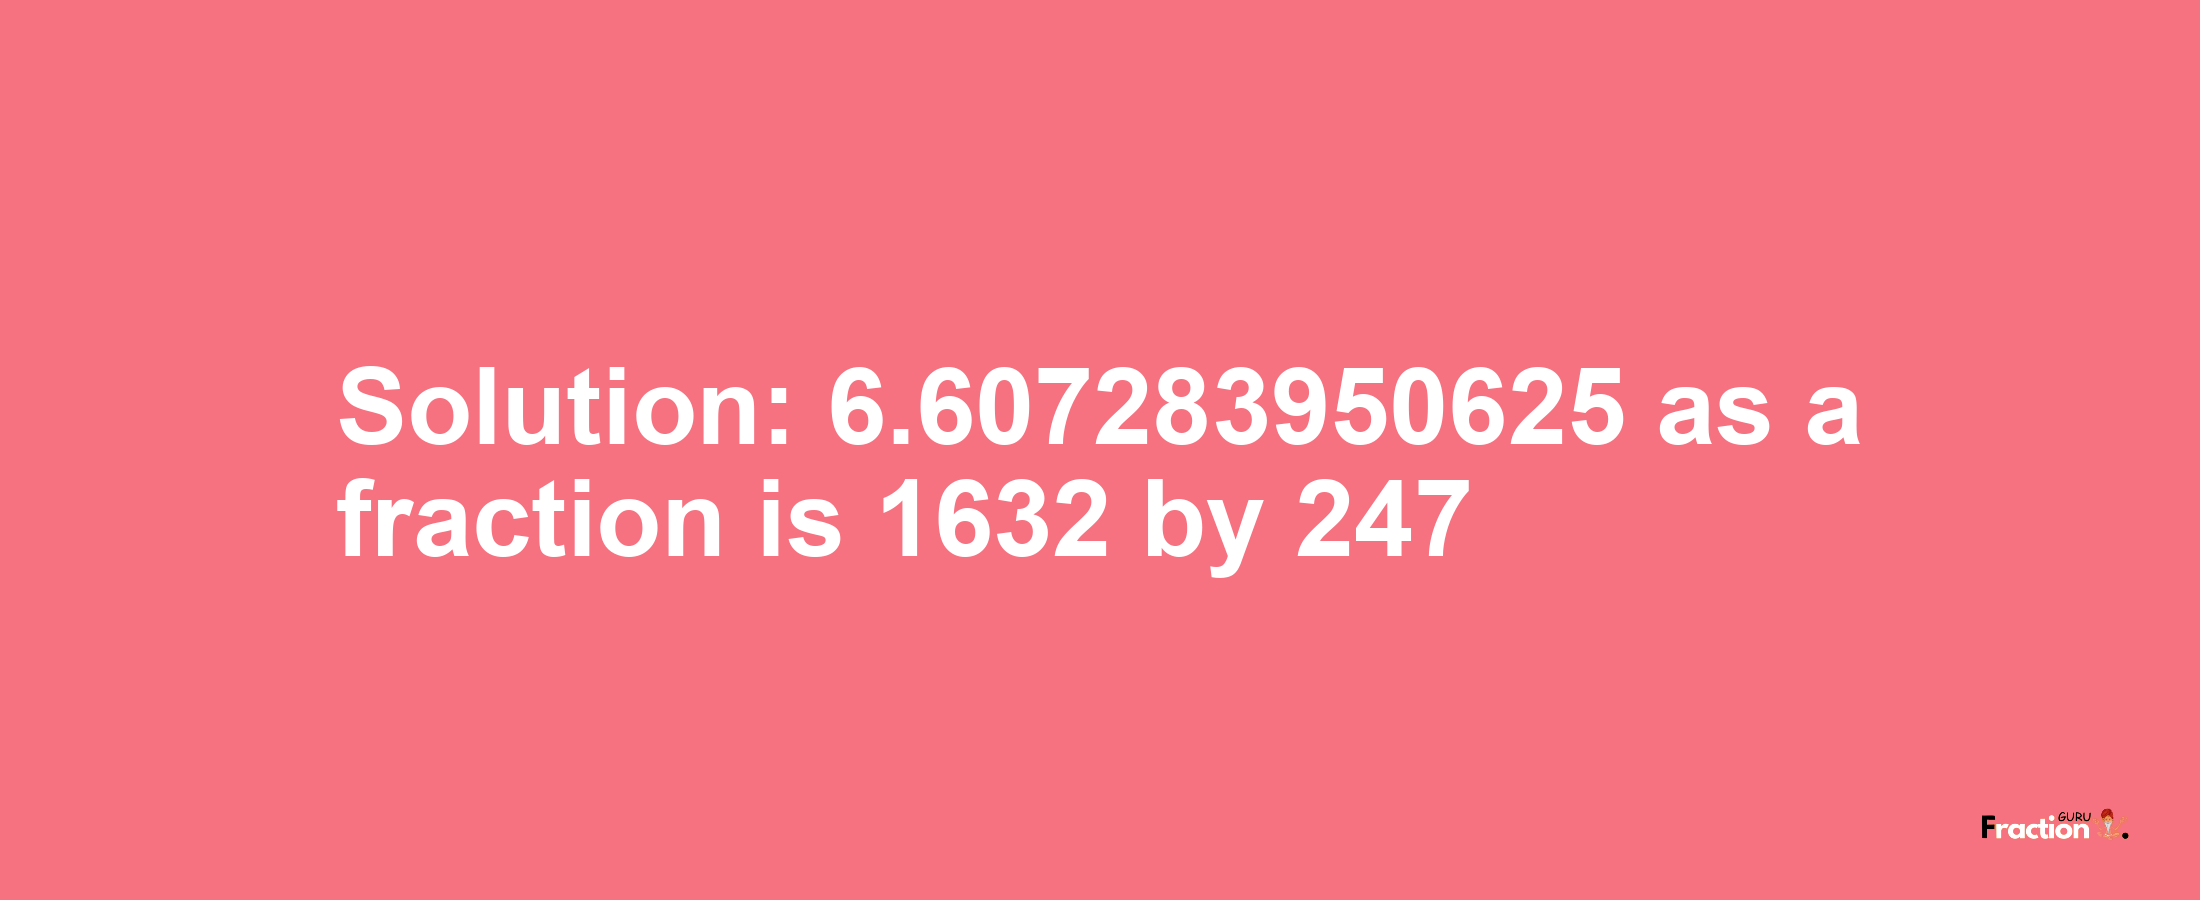 Solution:6.607283950625 as a fraction is 1632/247